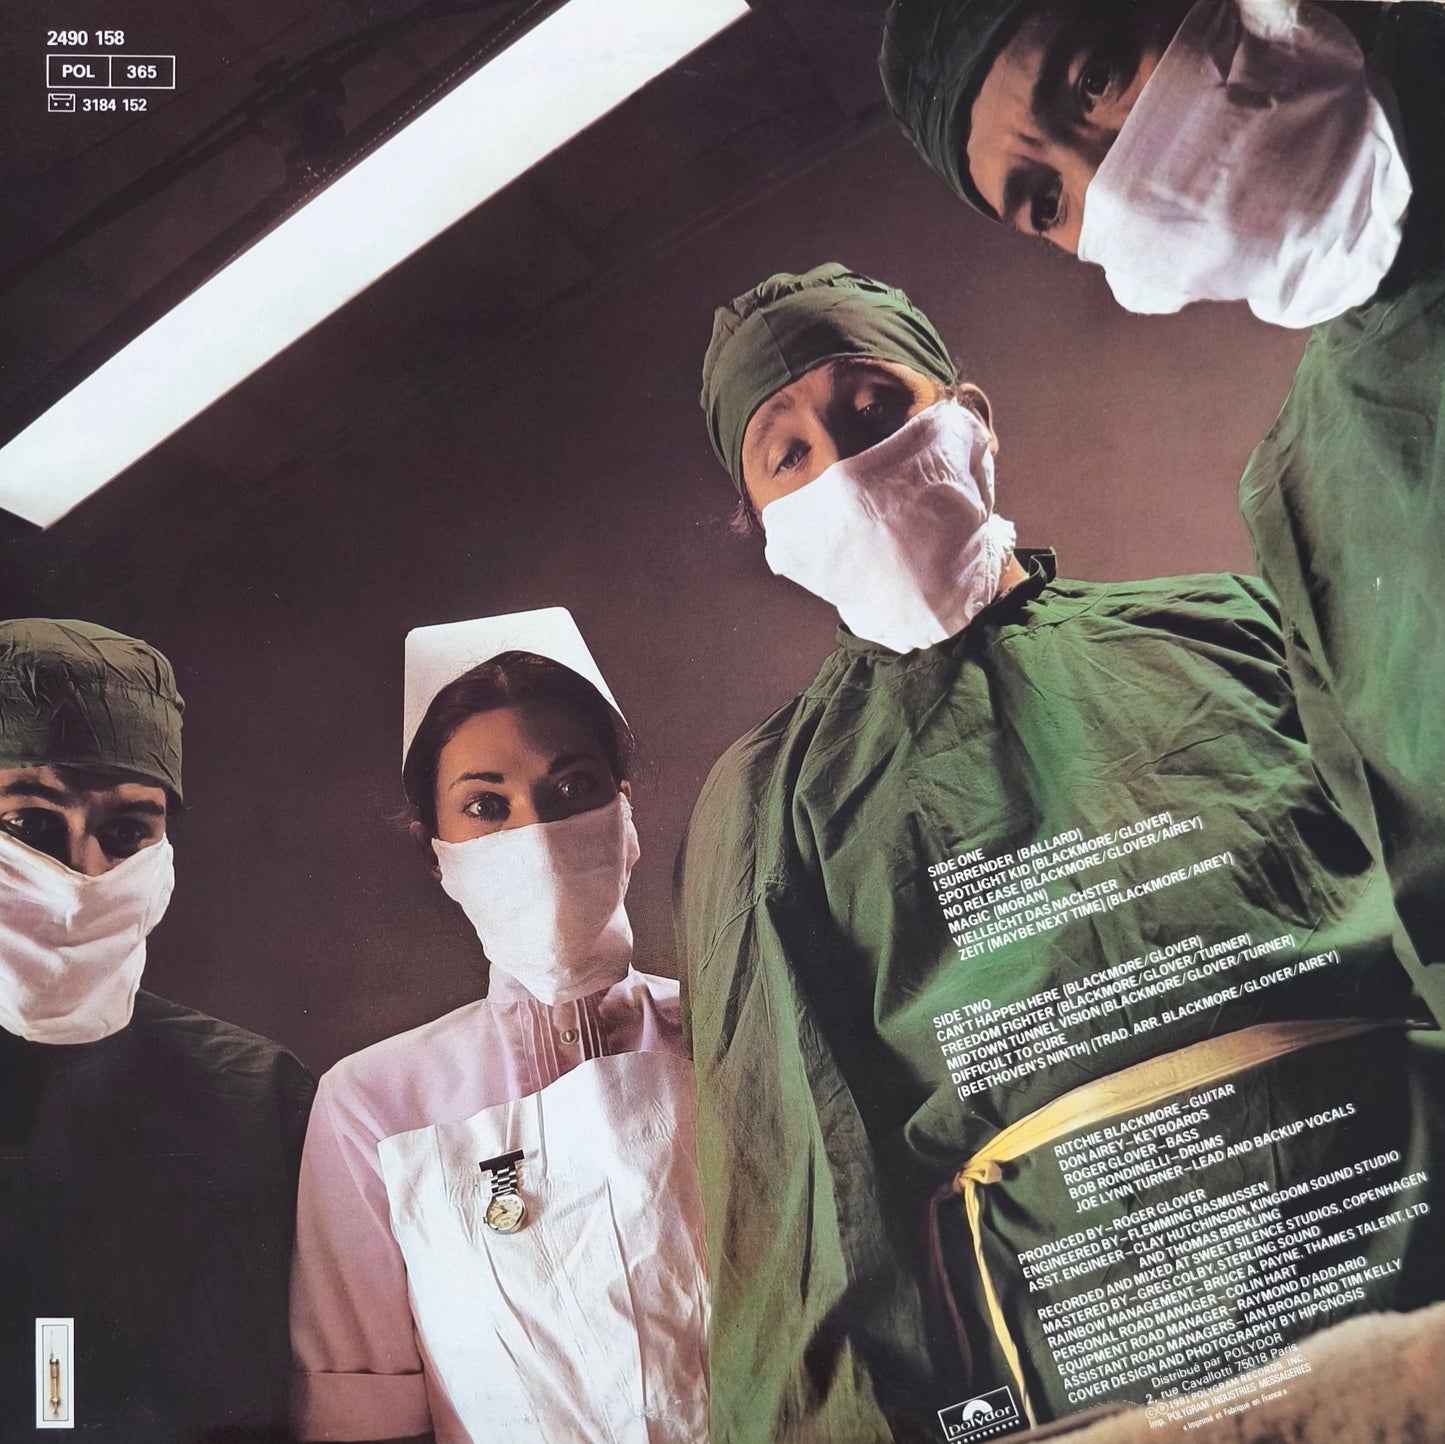 RAINBOW - Difficult To Cure